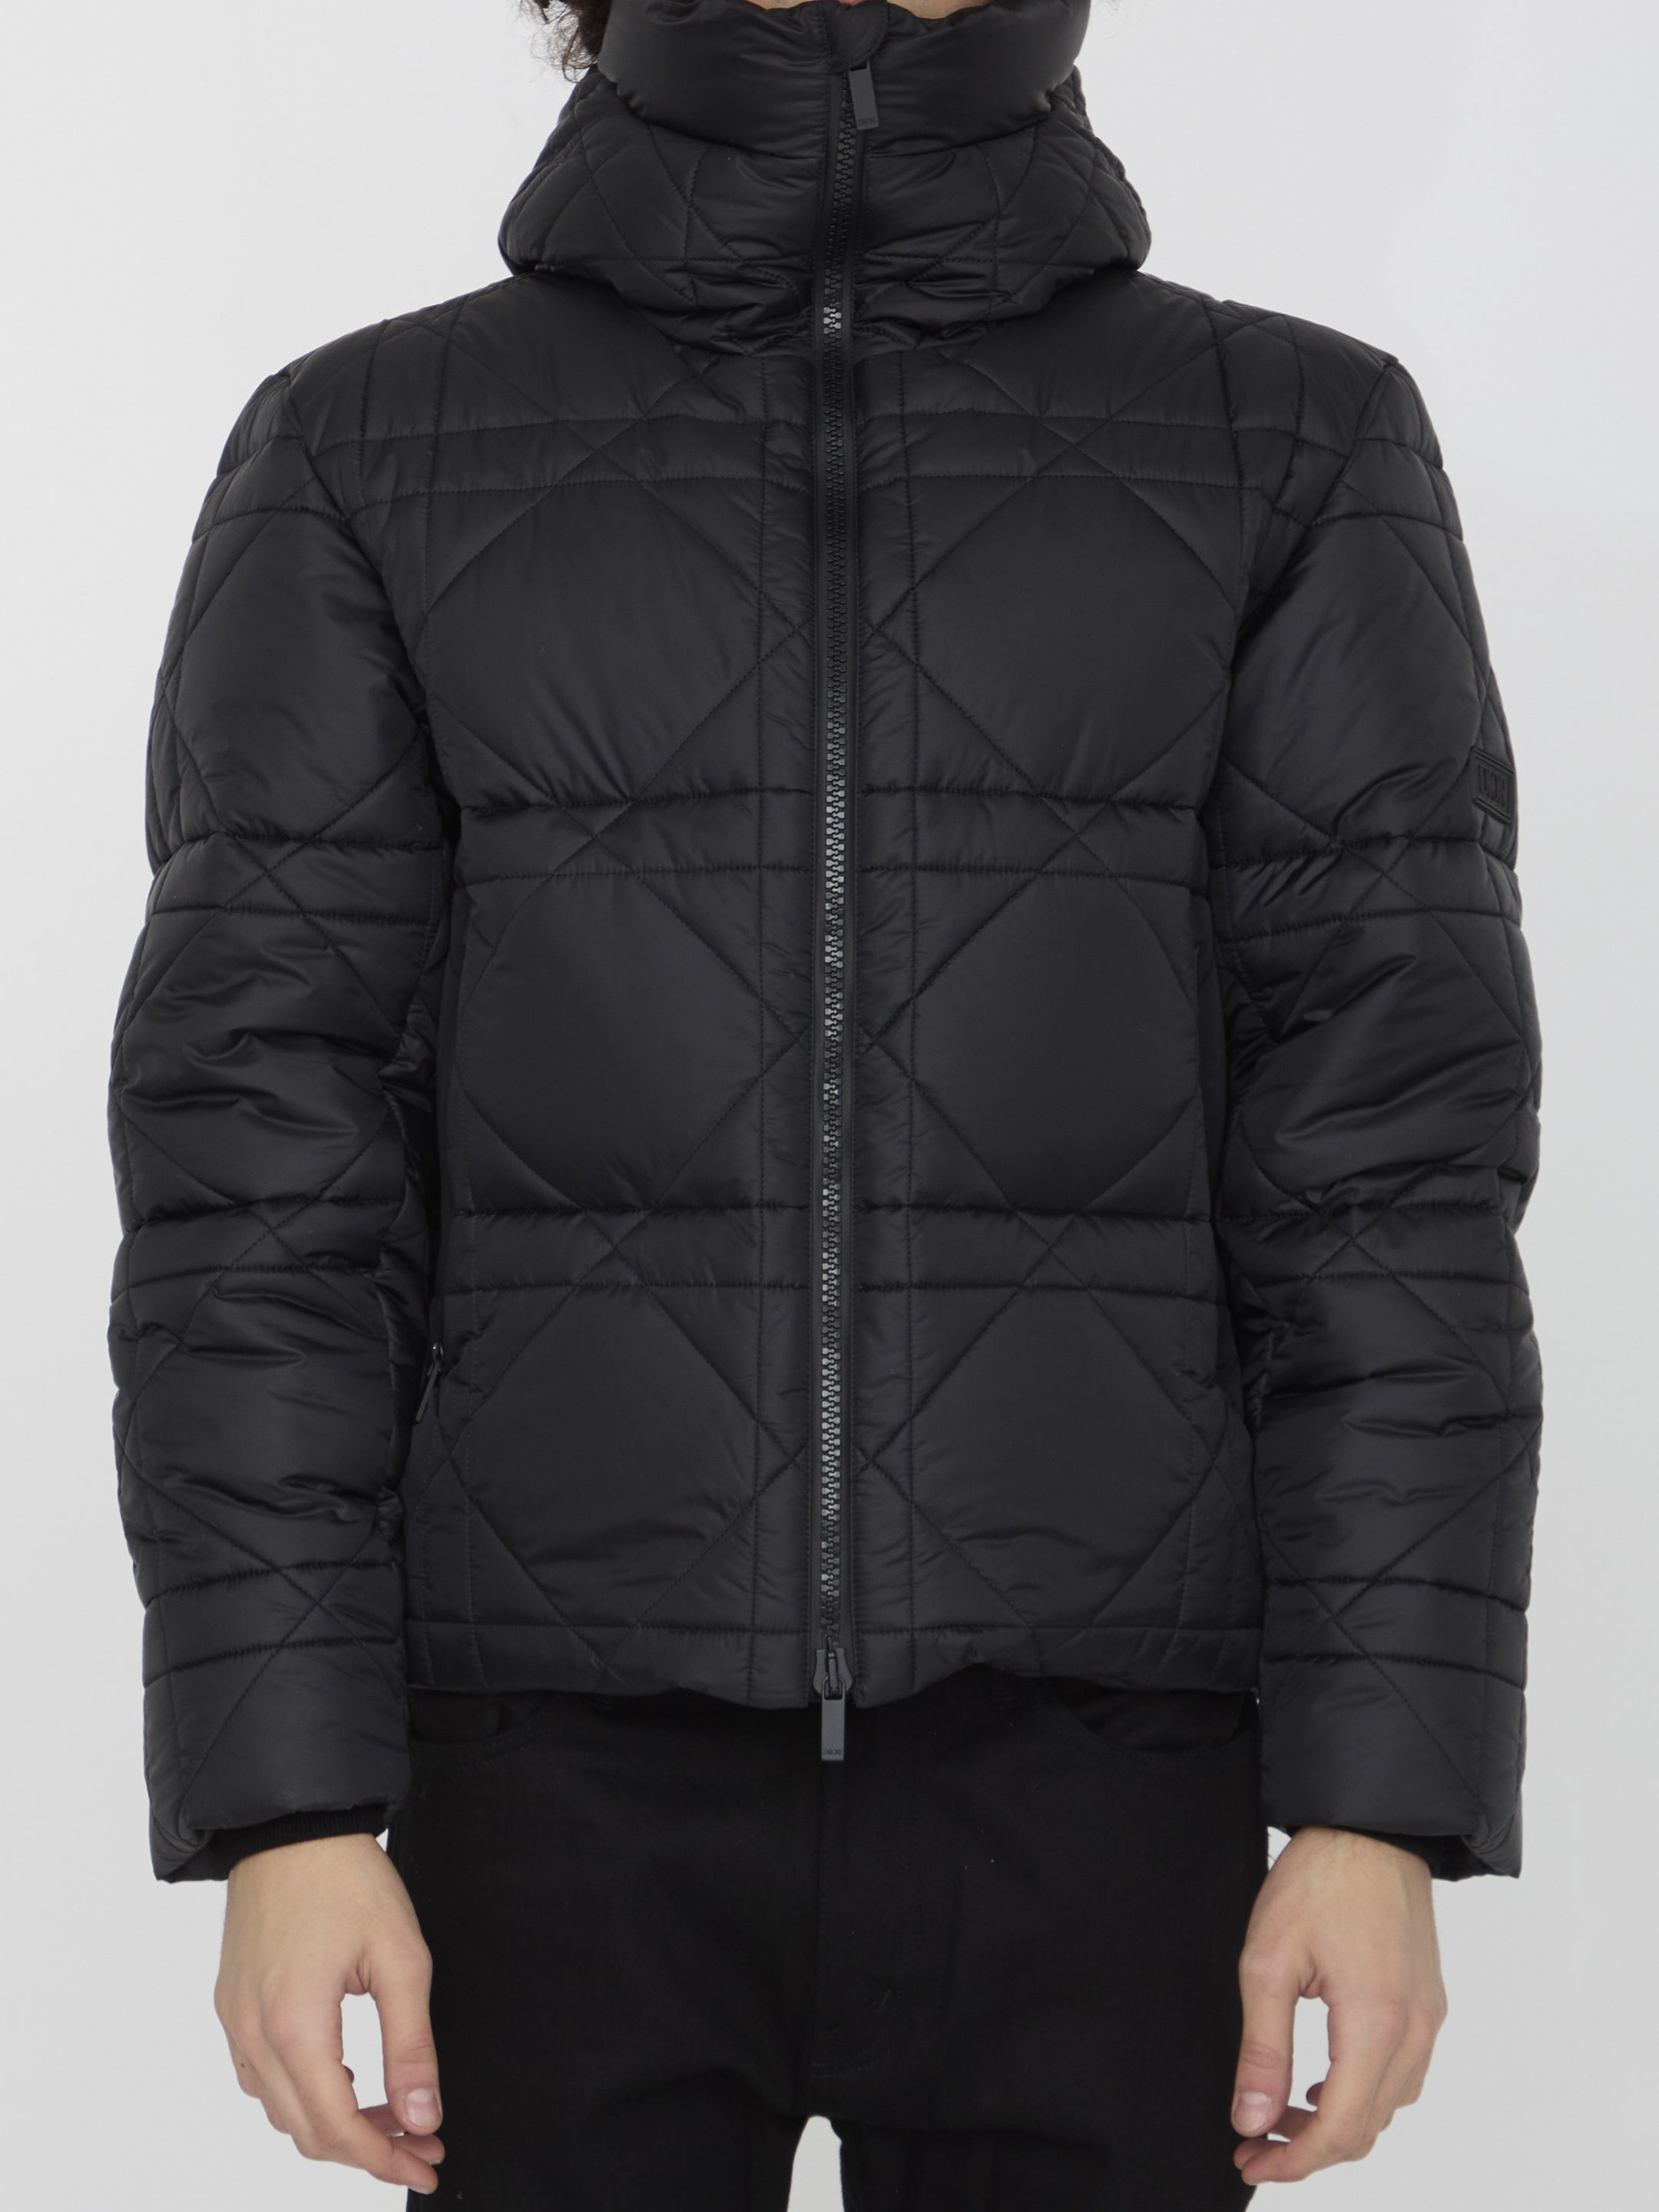 DIOR-HOMME-OUTLET-SALE-Cannage-puffer-jacket-Jacken-Mantel-50-BLACK-ARCHIVE-COLLECTION.jpg